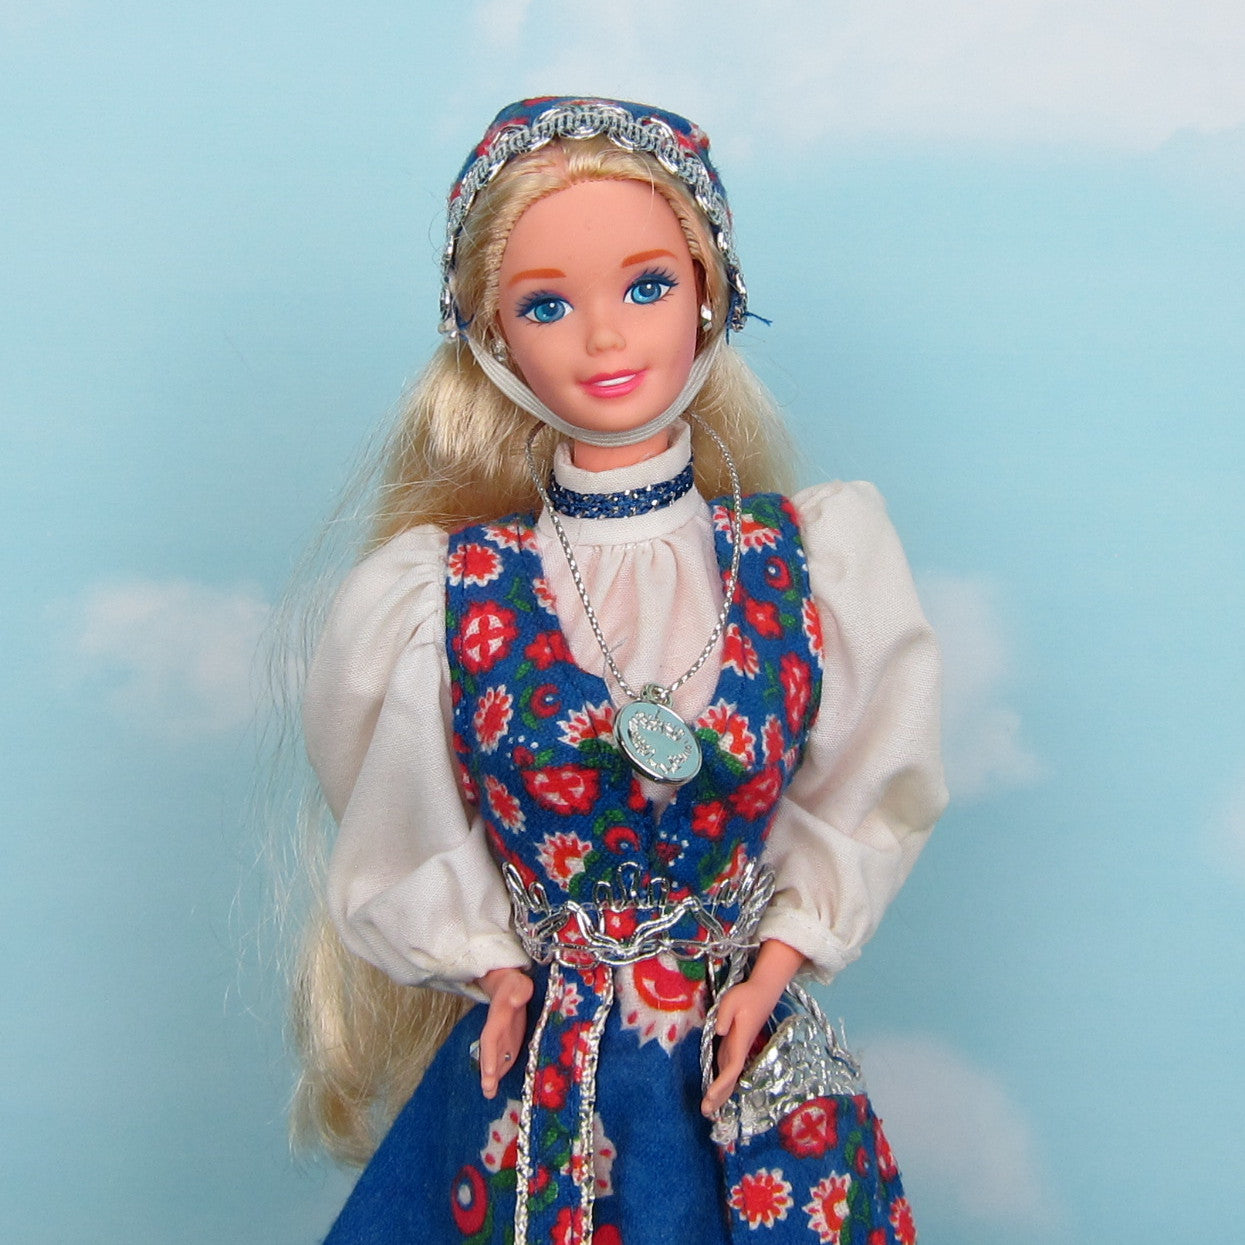 Norwegian Barbie Doll Vintage 1995 Dolls of the World Collector Editio